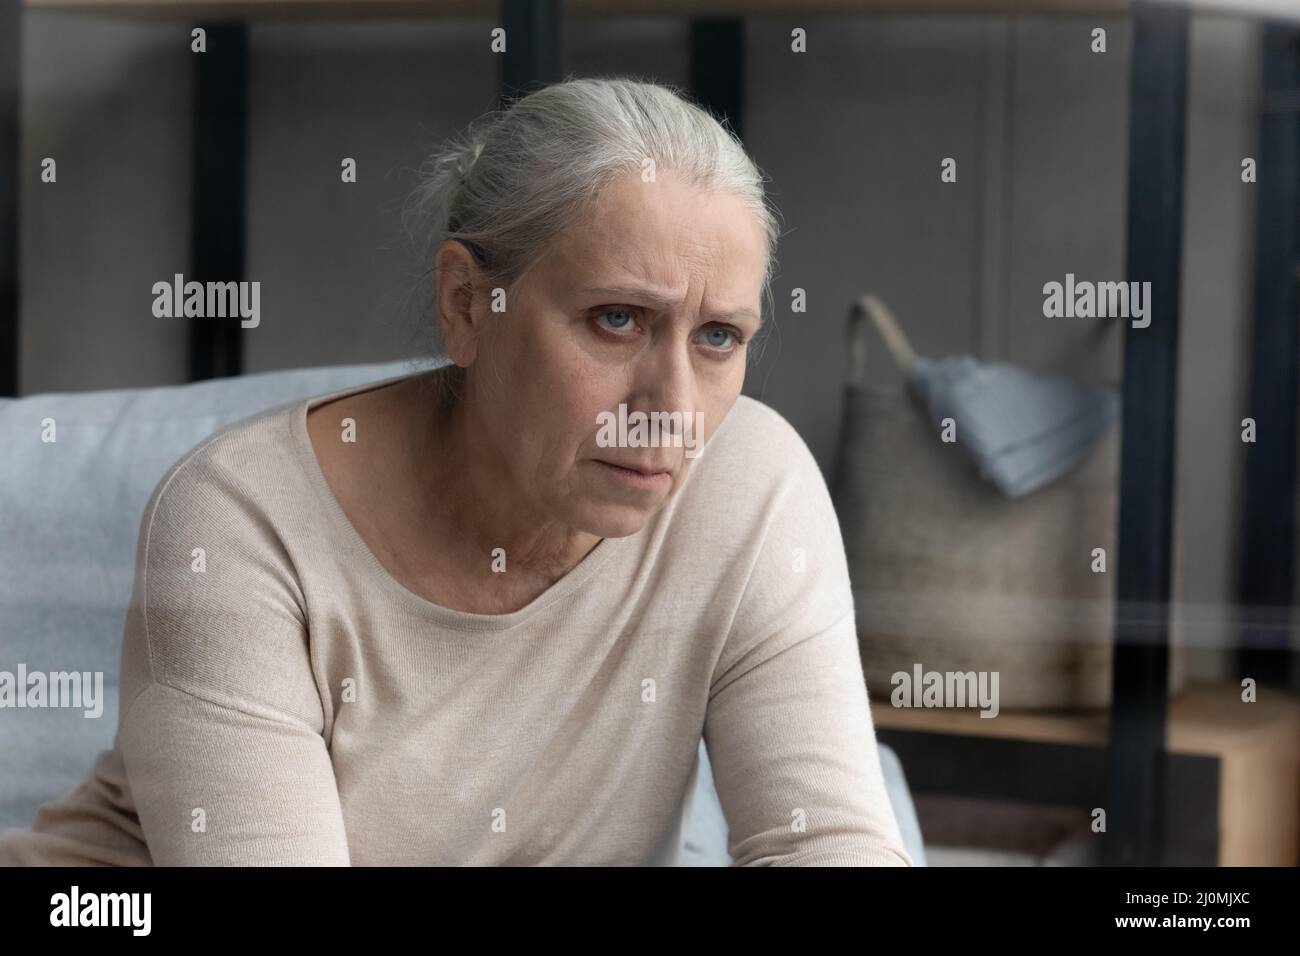 Pessimistic aged woman suffering from senile disease looking unhappy Stock Photo